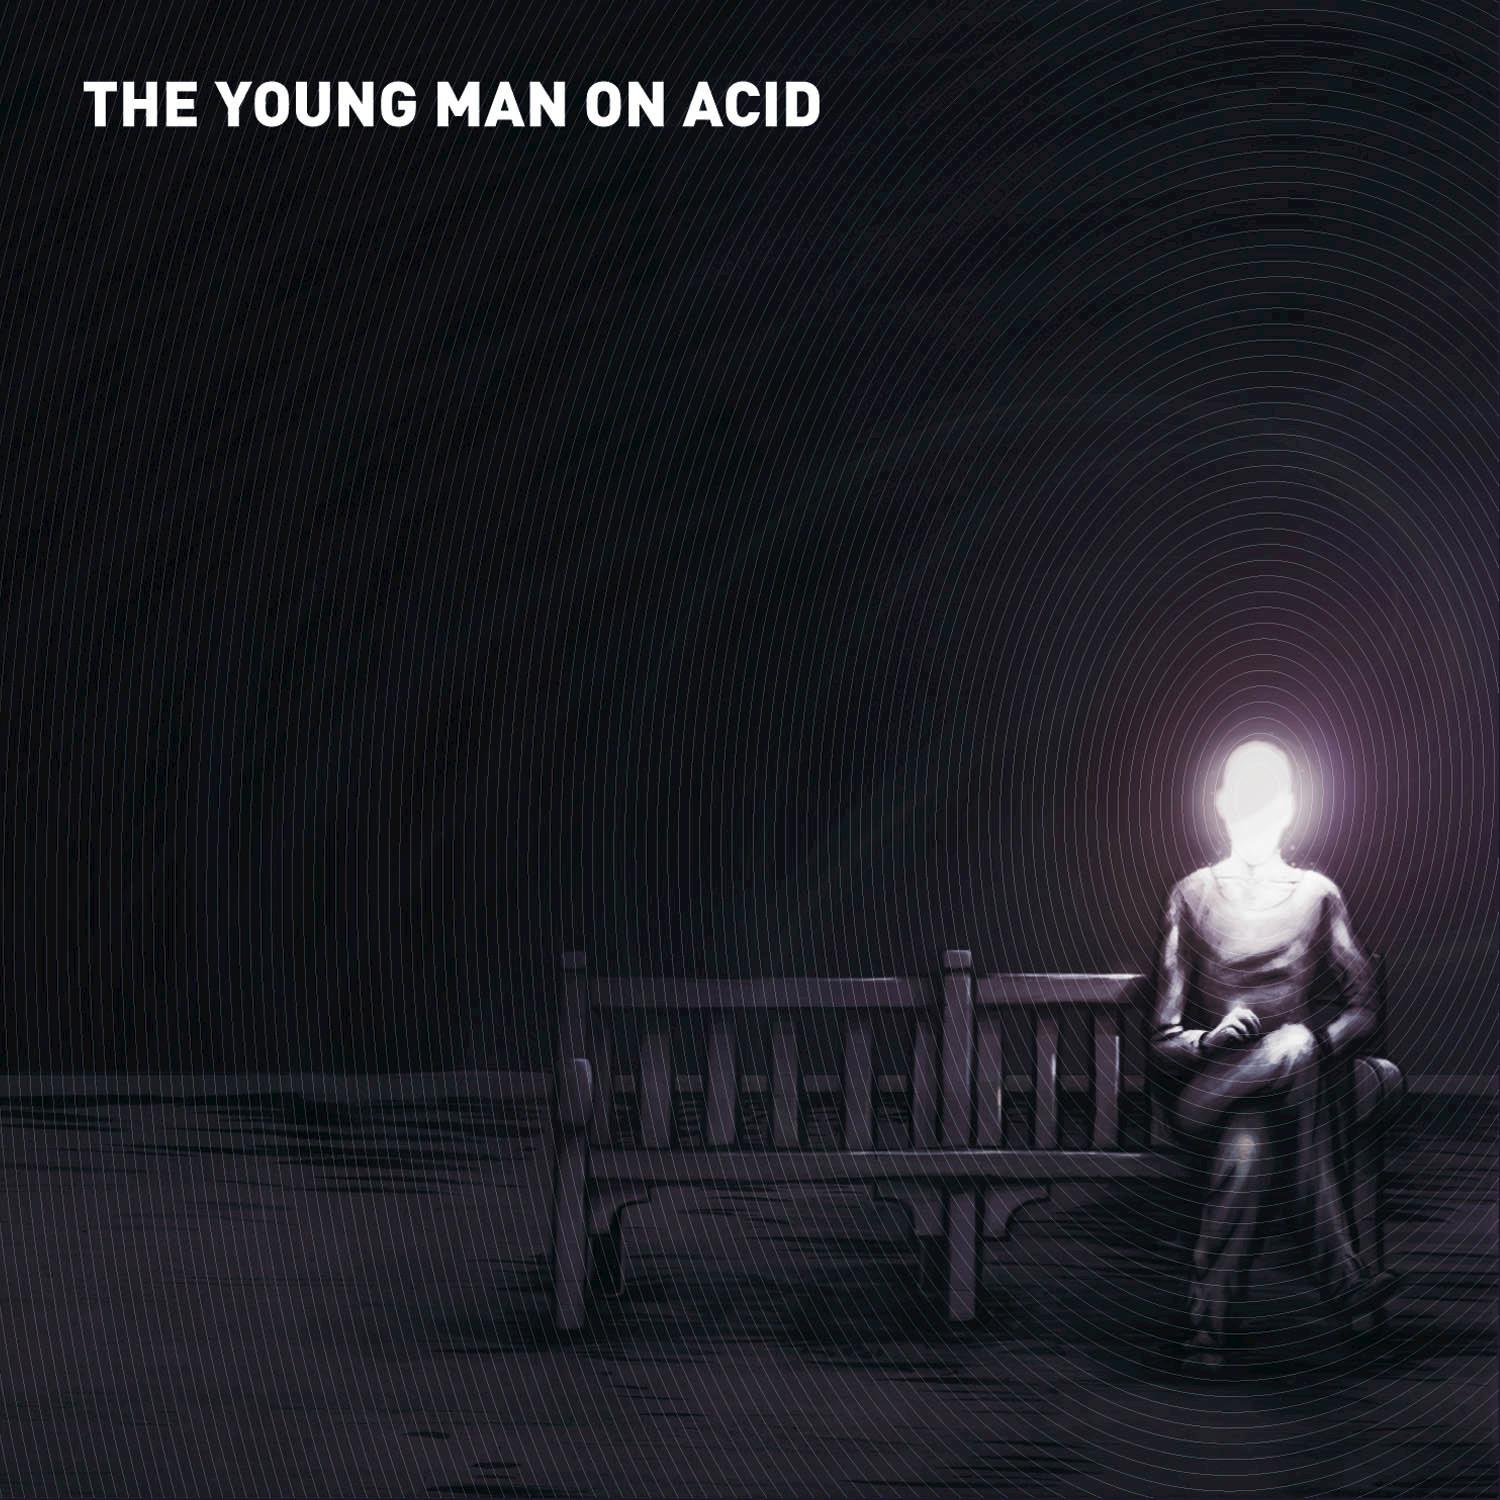 The Young Man on Acid: Compiled By Pick (Best of Goa, Progressive Psy, Techno Psy, Psychedelic Trance)